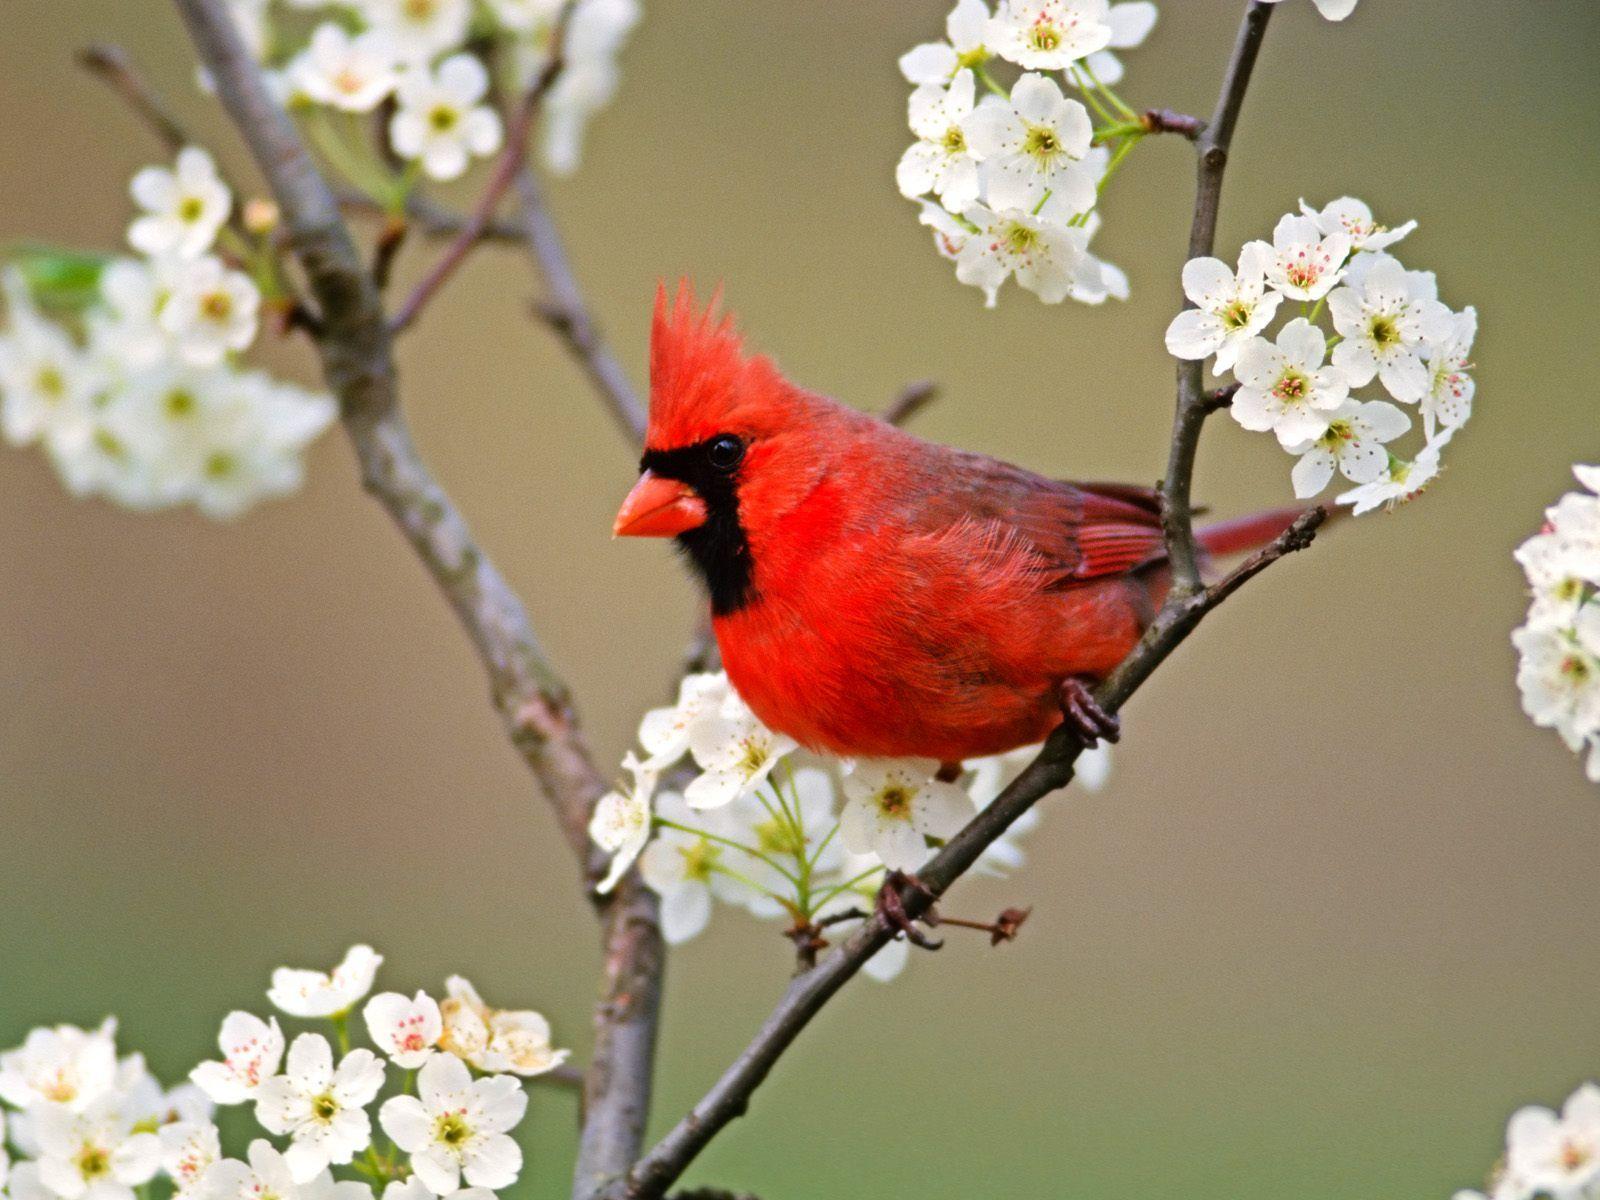 flowers for flower lovers.: Flowers and birds beautiful